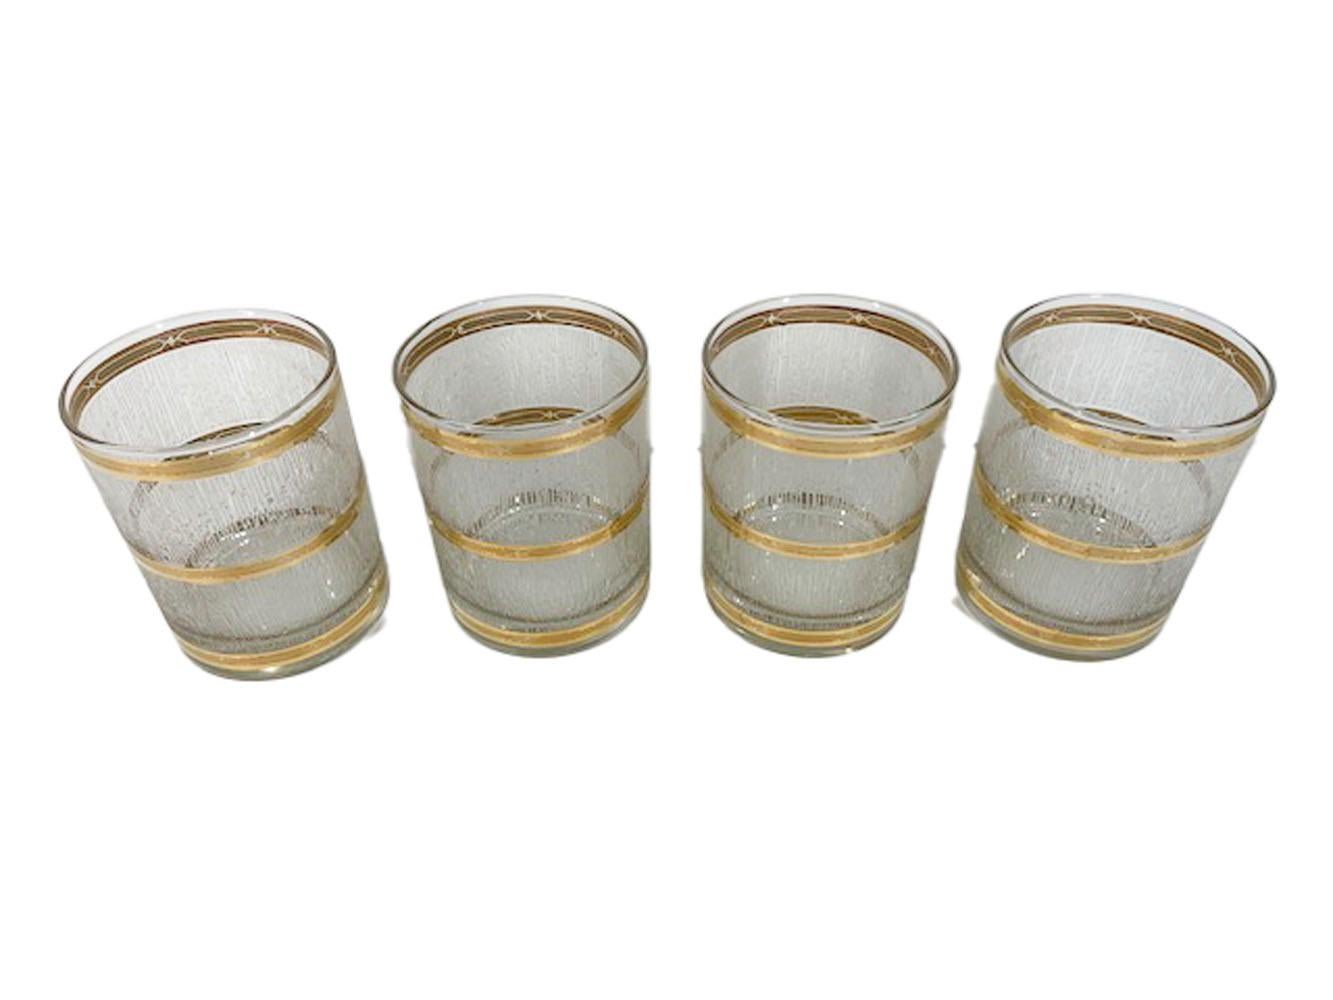 Mid-Century Modern rocks glasses by Culver, LTD in the Icicle pattern having 22 karat gold bands bordering wide bands of raised translucent 